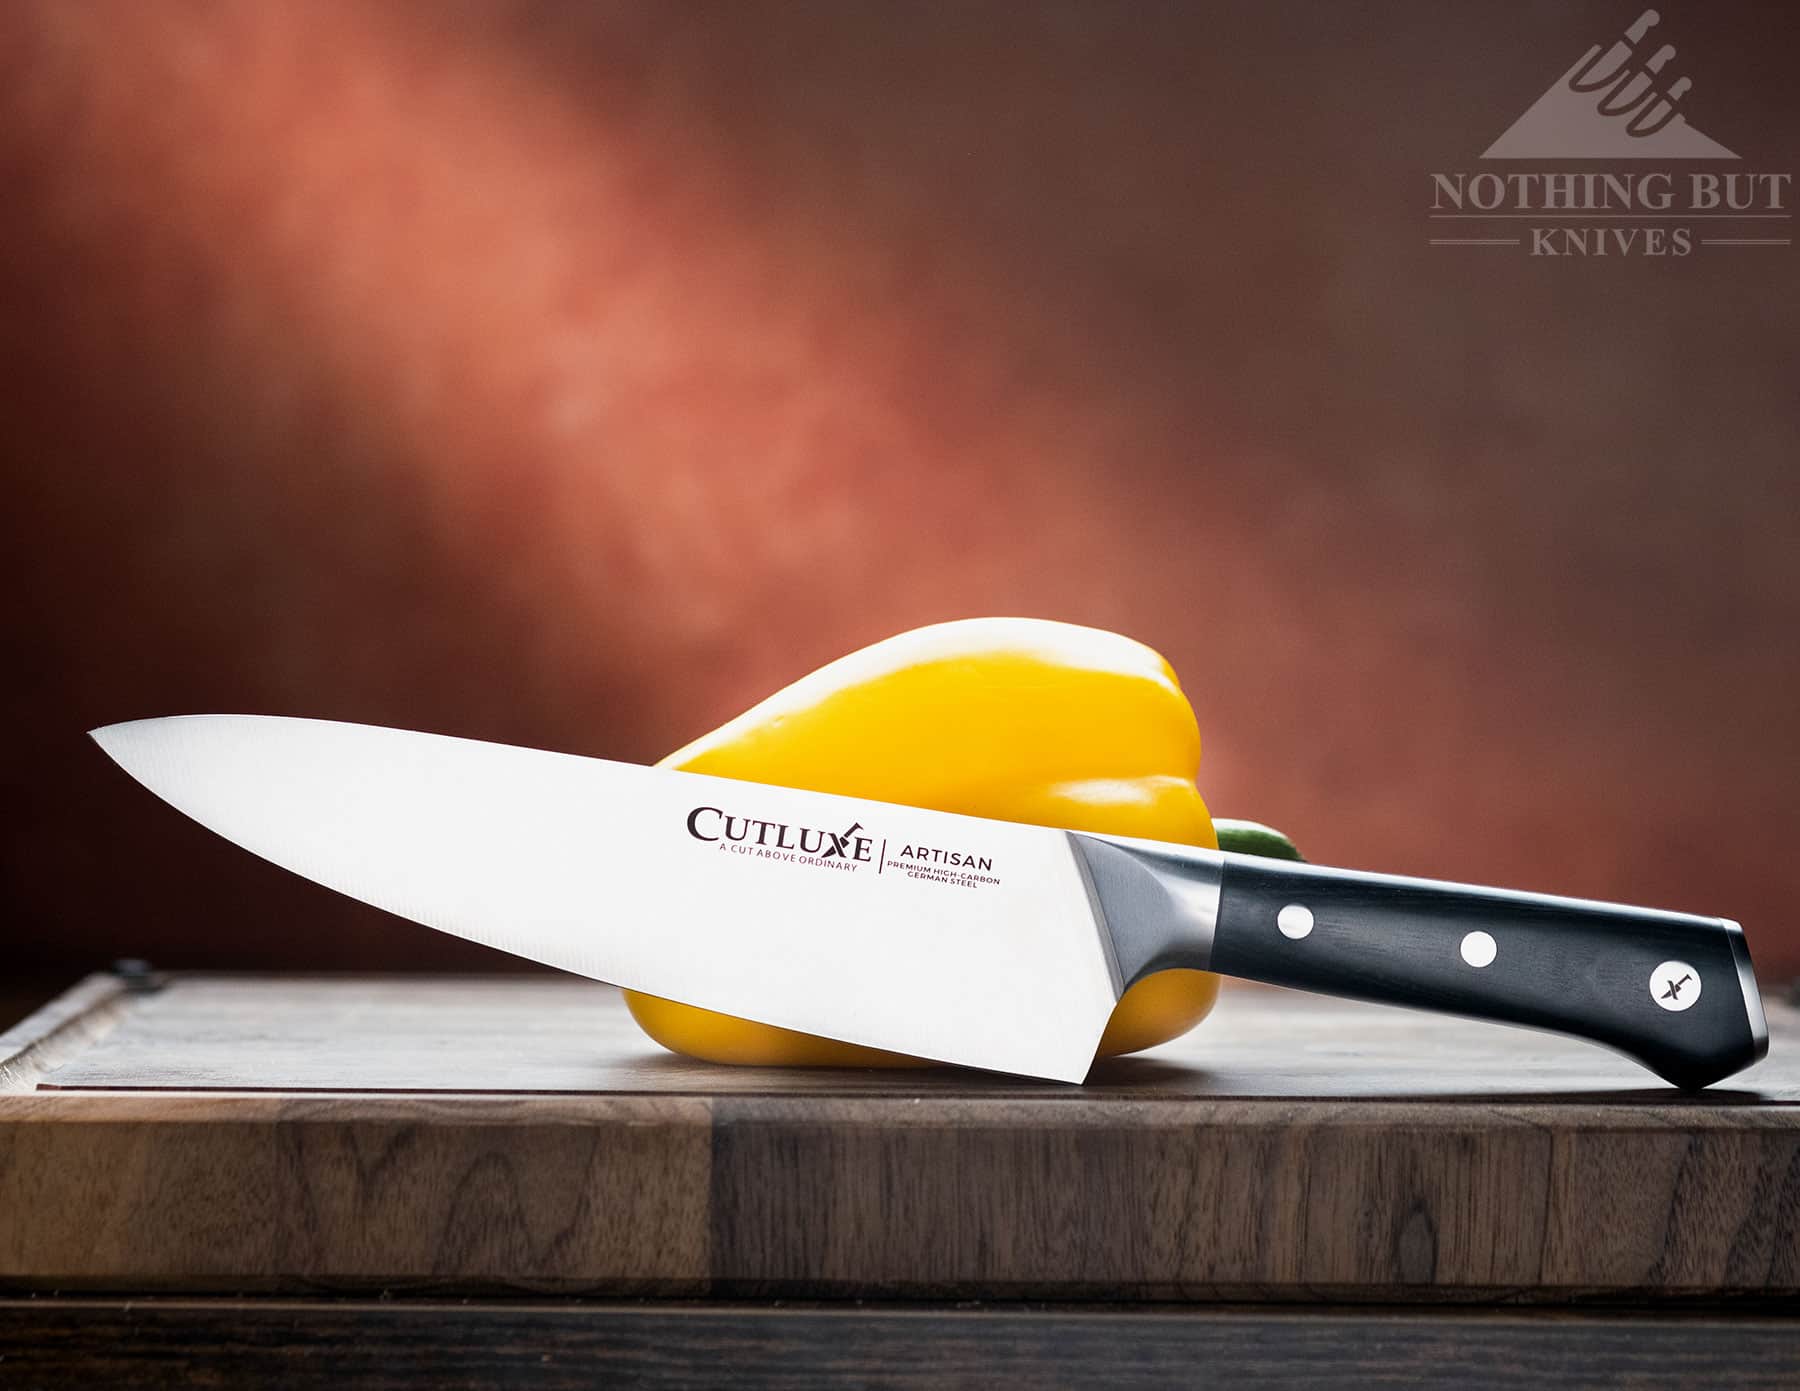 Victorinox Fibrox Pro Chef's Knife Review: Handles Any Task